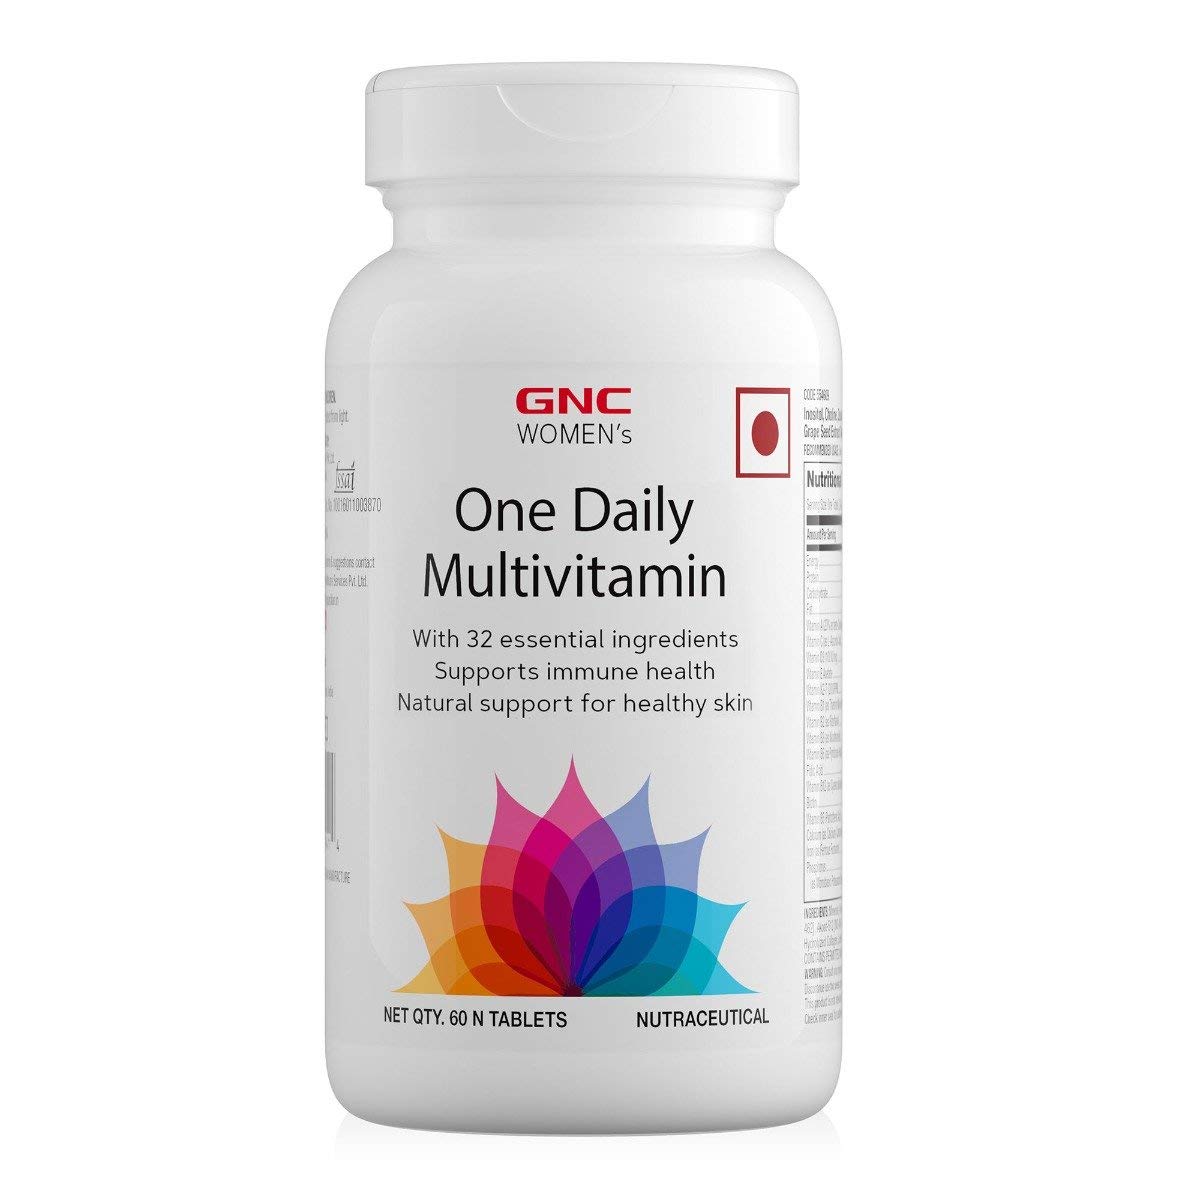 GNC Women's One Daily Multivitamin Tablet